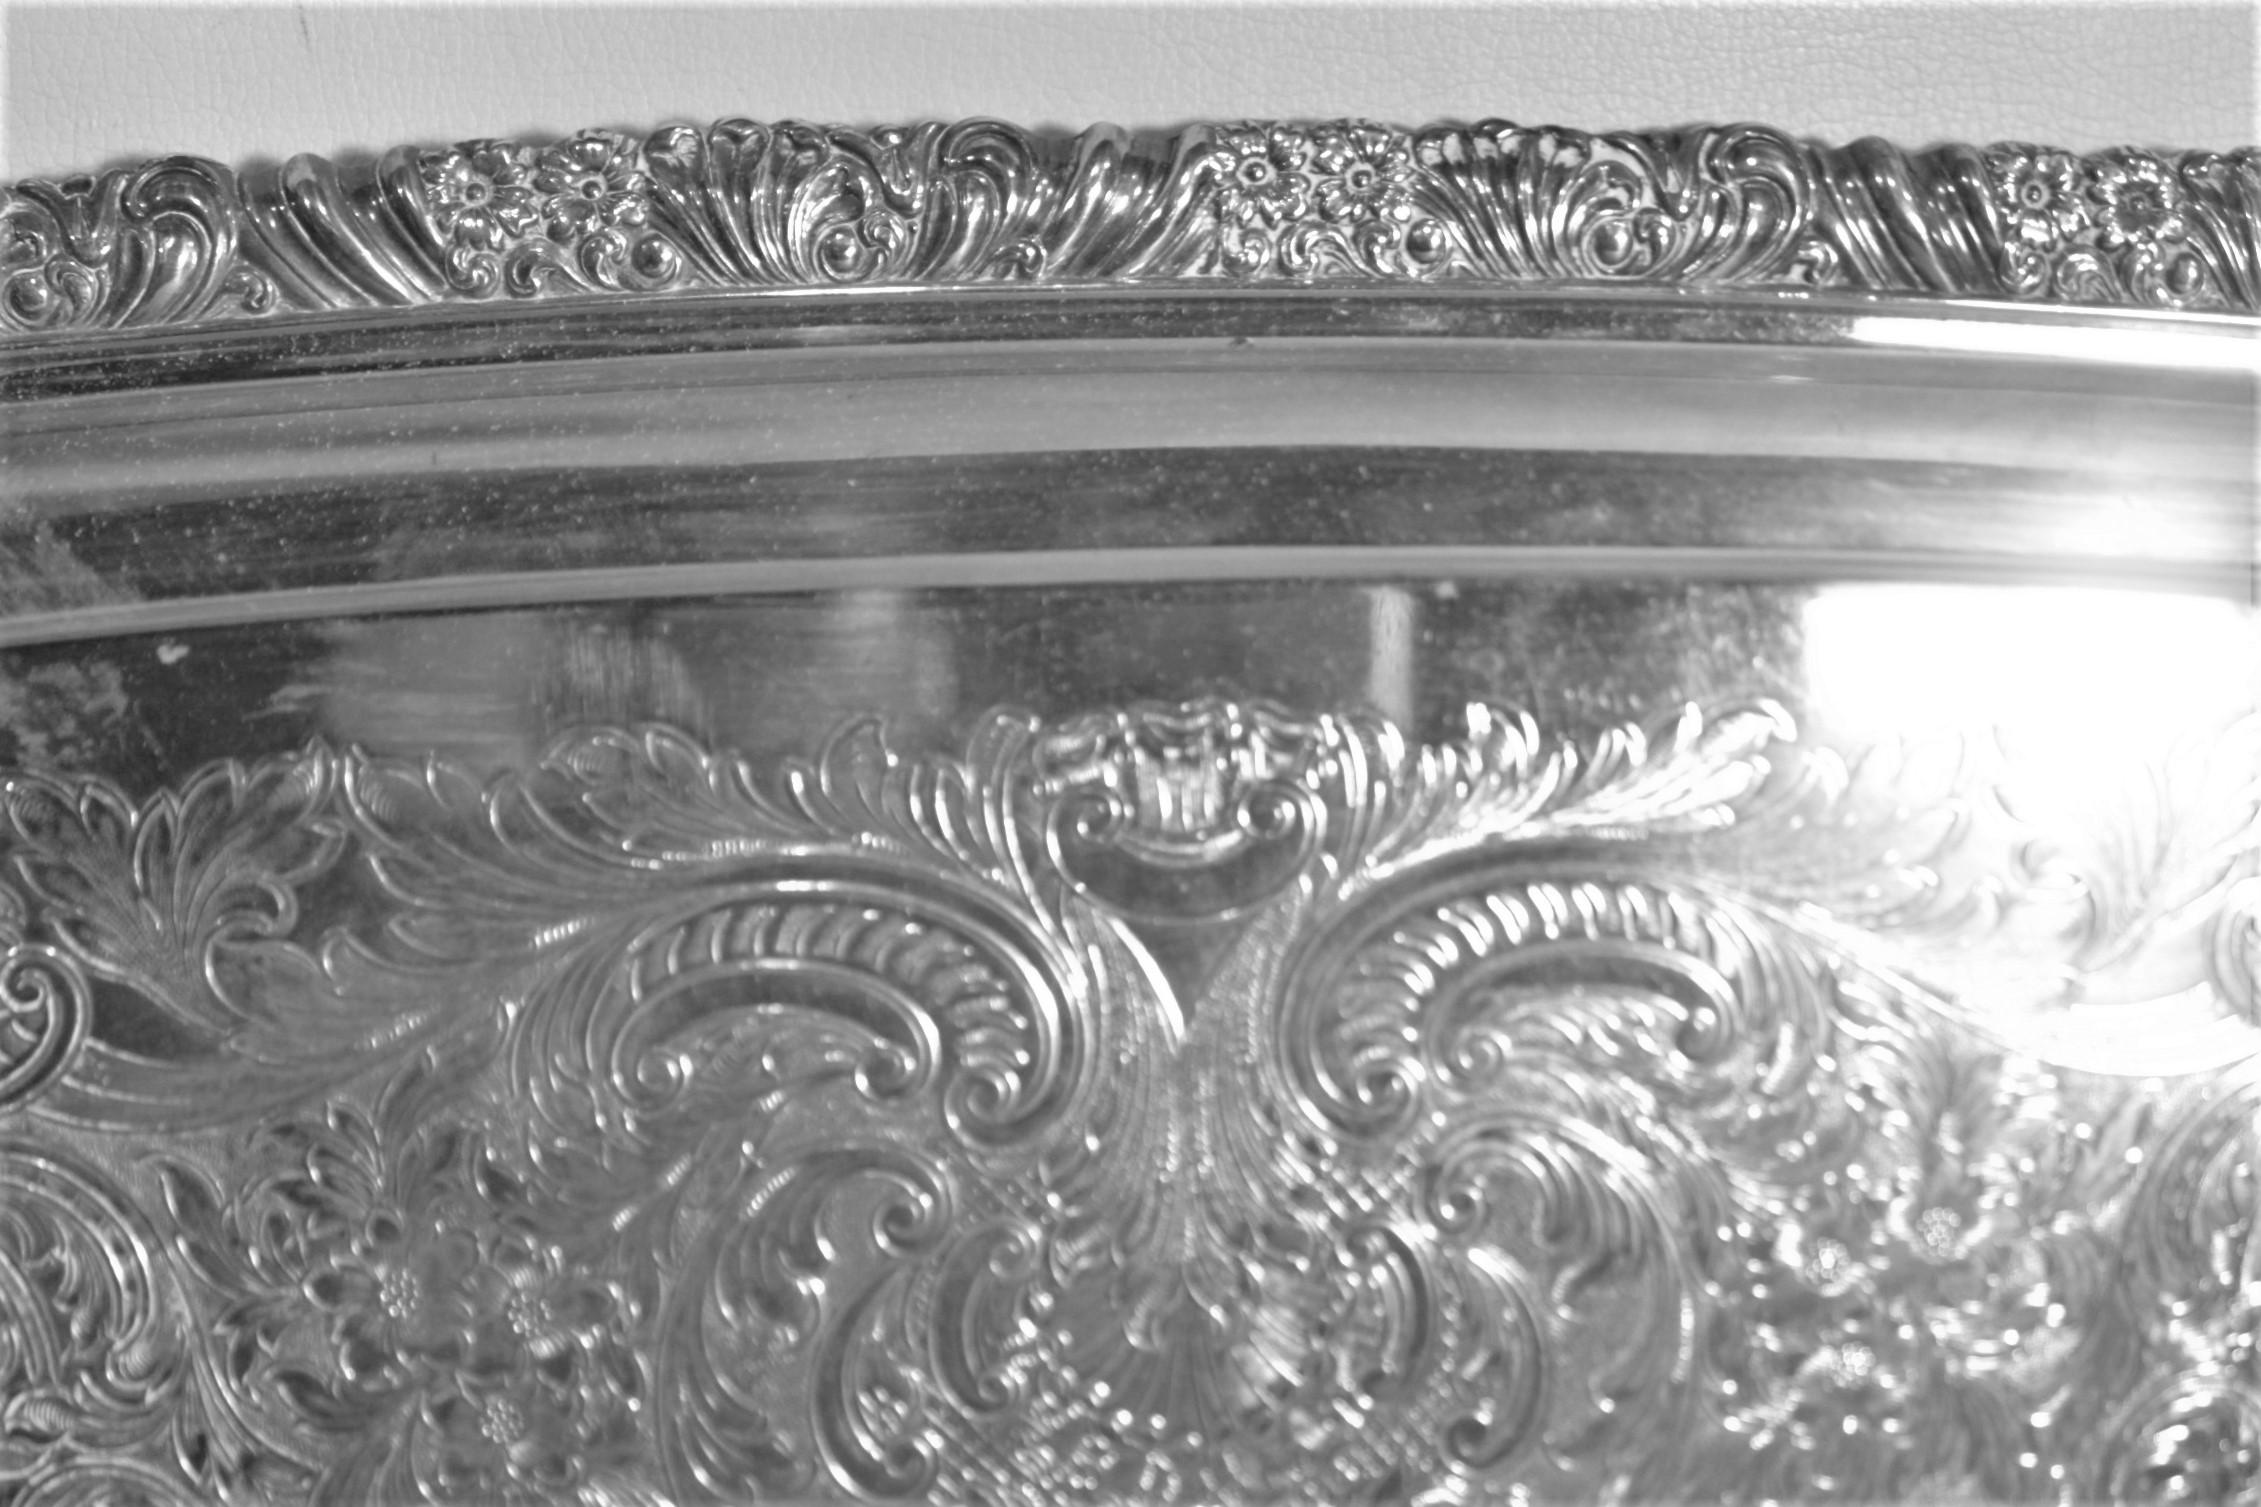 Copper Antique English Silver Plated Serving Tray with Ornate Accents & Engraving For Sale